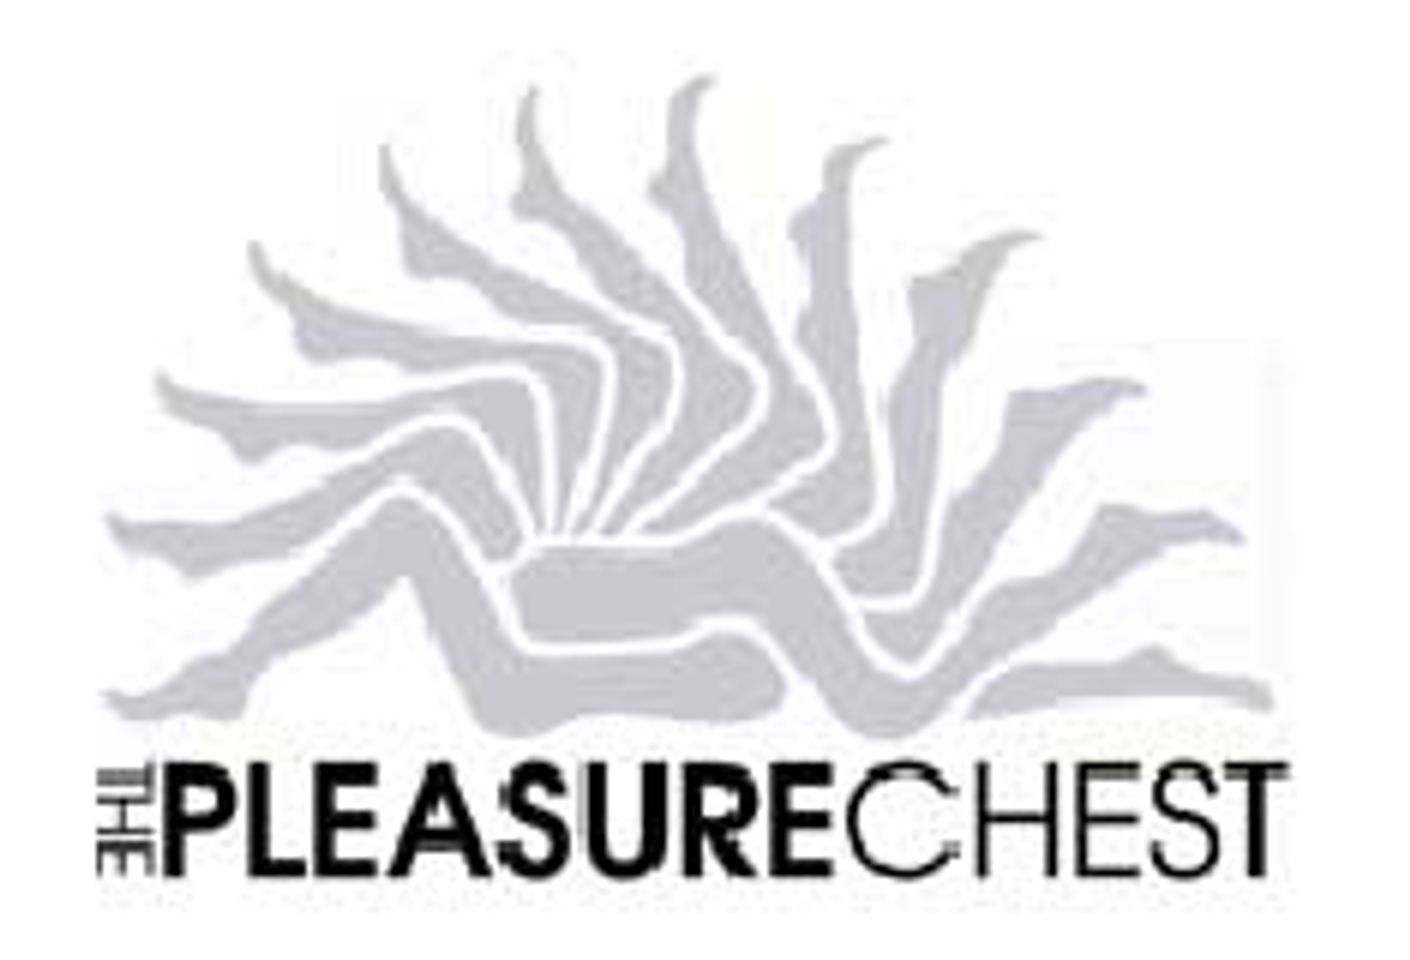 The Pleasure Chest Offers to Donate 15 Percent of Web Sales to Scarleteen